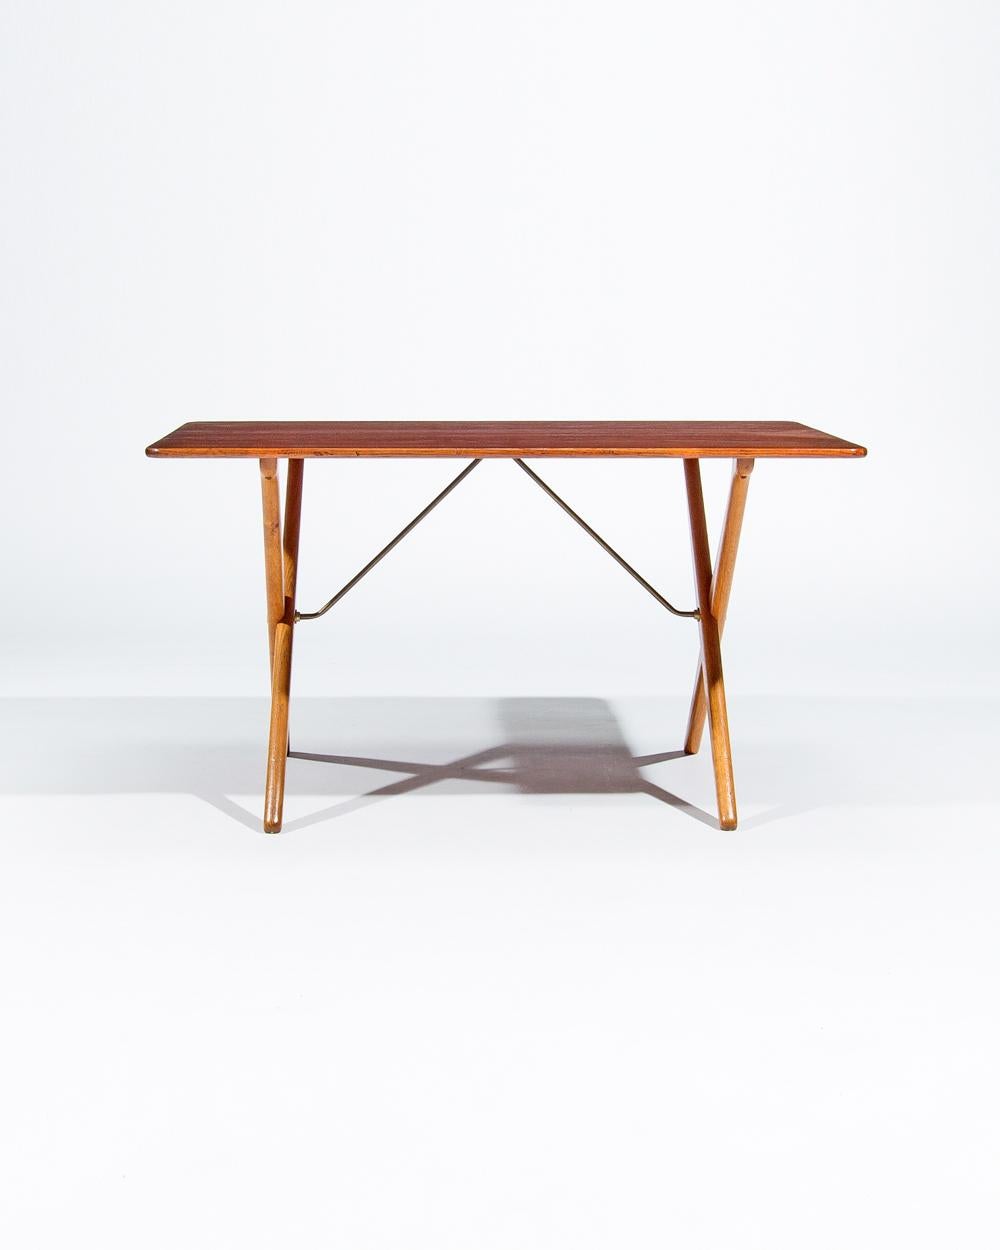 A Rare X-frame coffee table / sofa table AT-308 designed by Hans Wegner for cabinetmaker Andreas Tuck in the 1950s. A rare and interesting piece of design a really standout piece showing the skill of one of Denmark’s finest furniture designers Hans